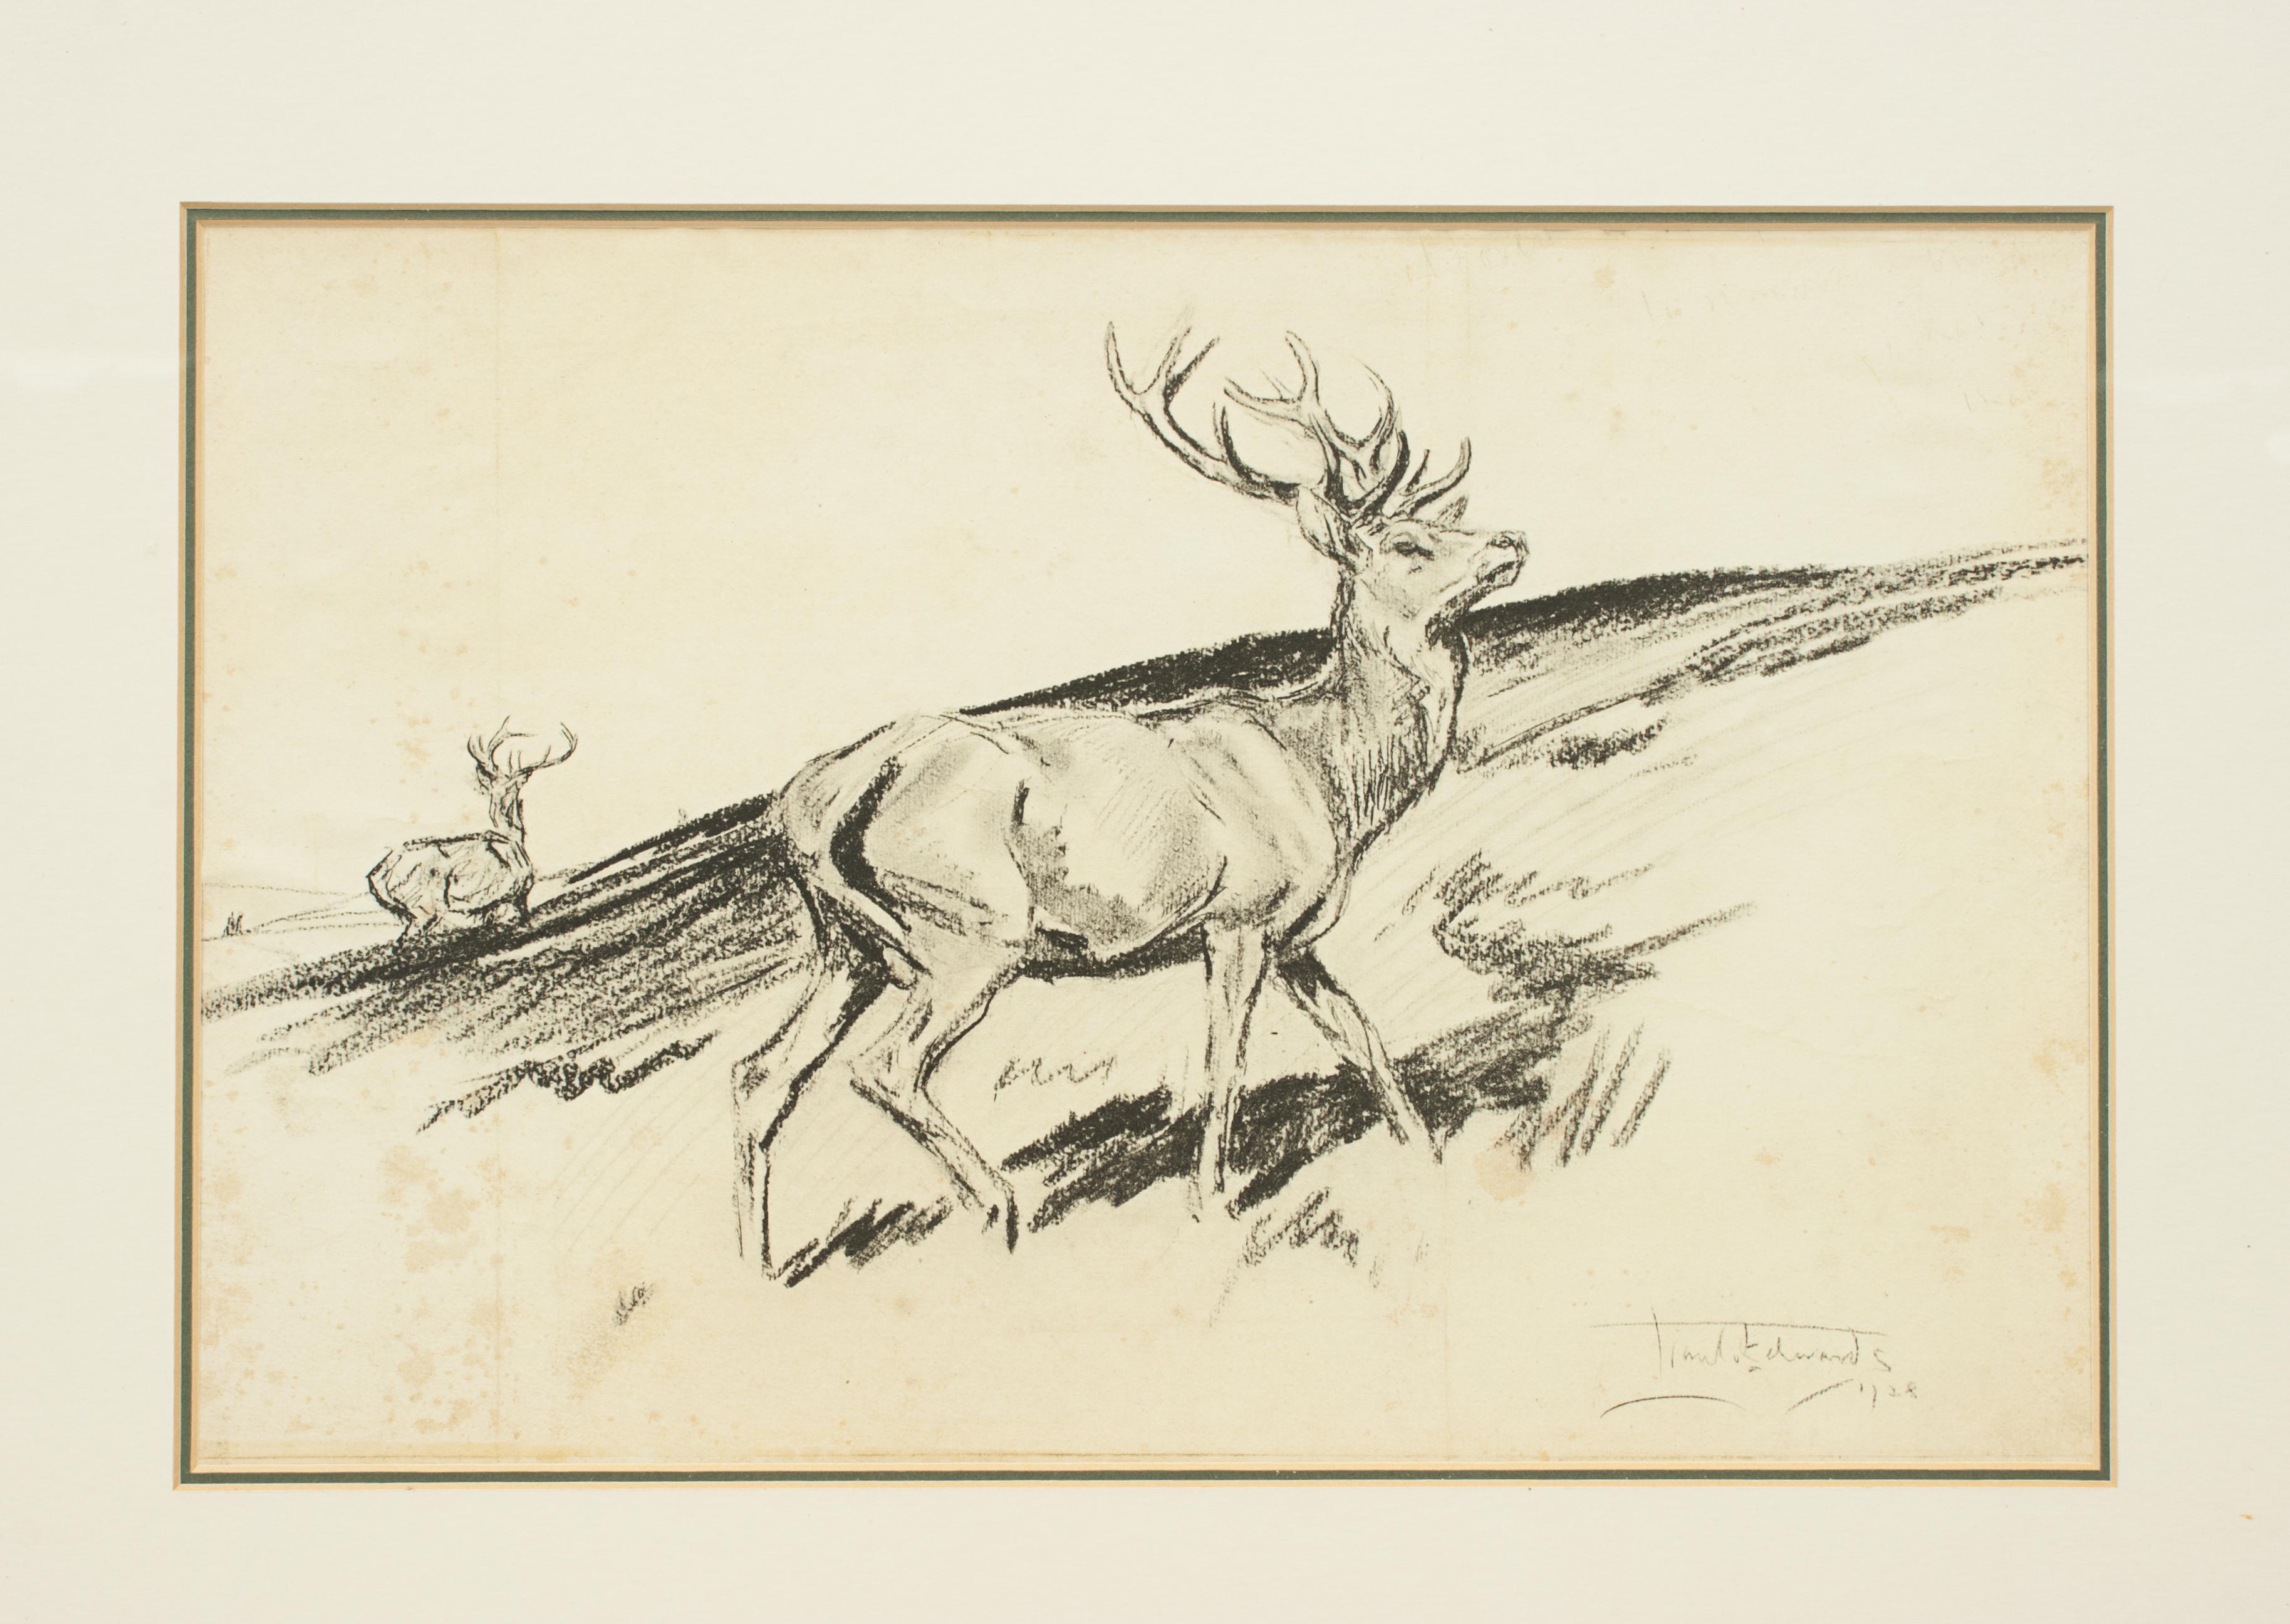 Sporting Art Original Lionel Edwards Pencil Drawing of a Stag on the Hill, Signed and Dated